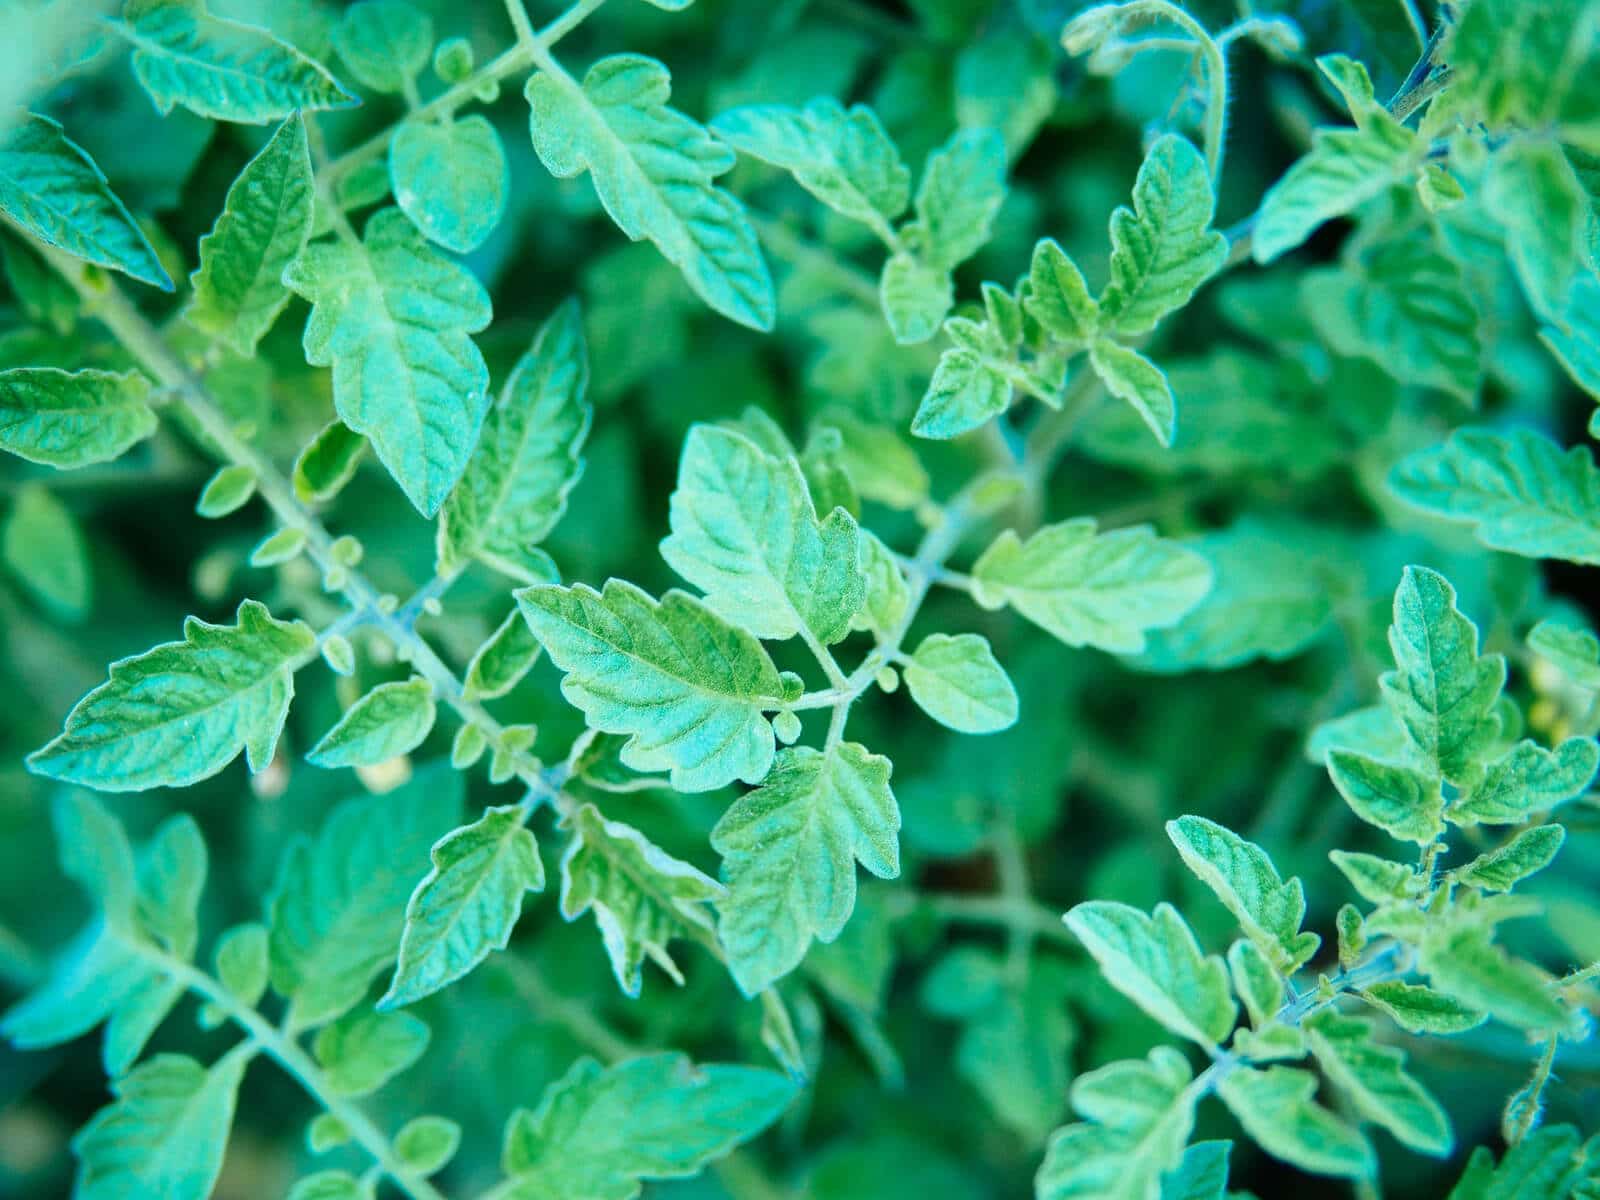 Close-up of tomato leaves with serrated edges